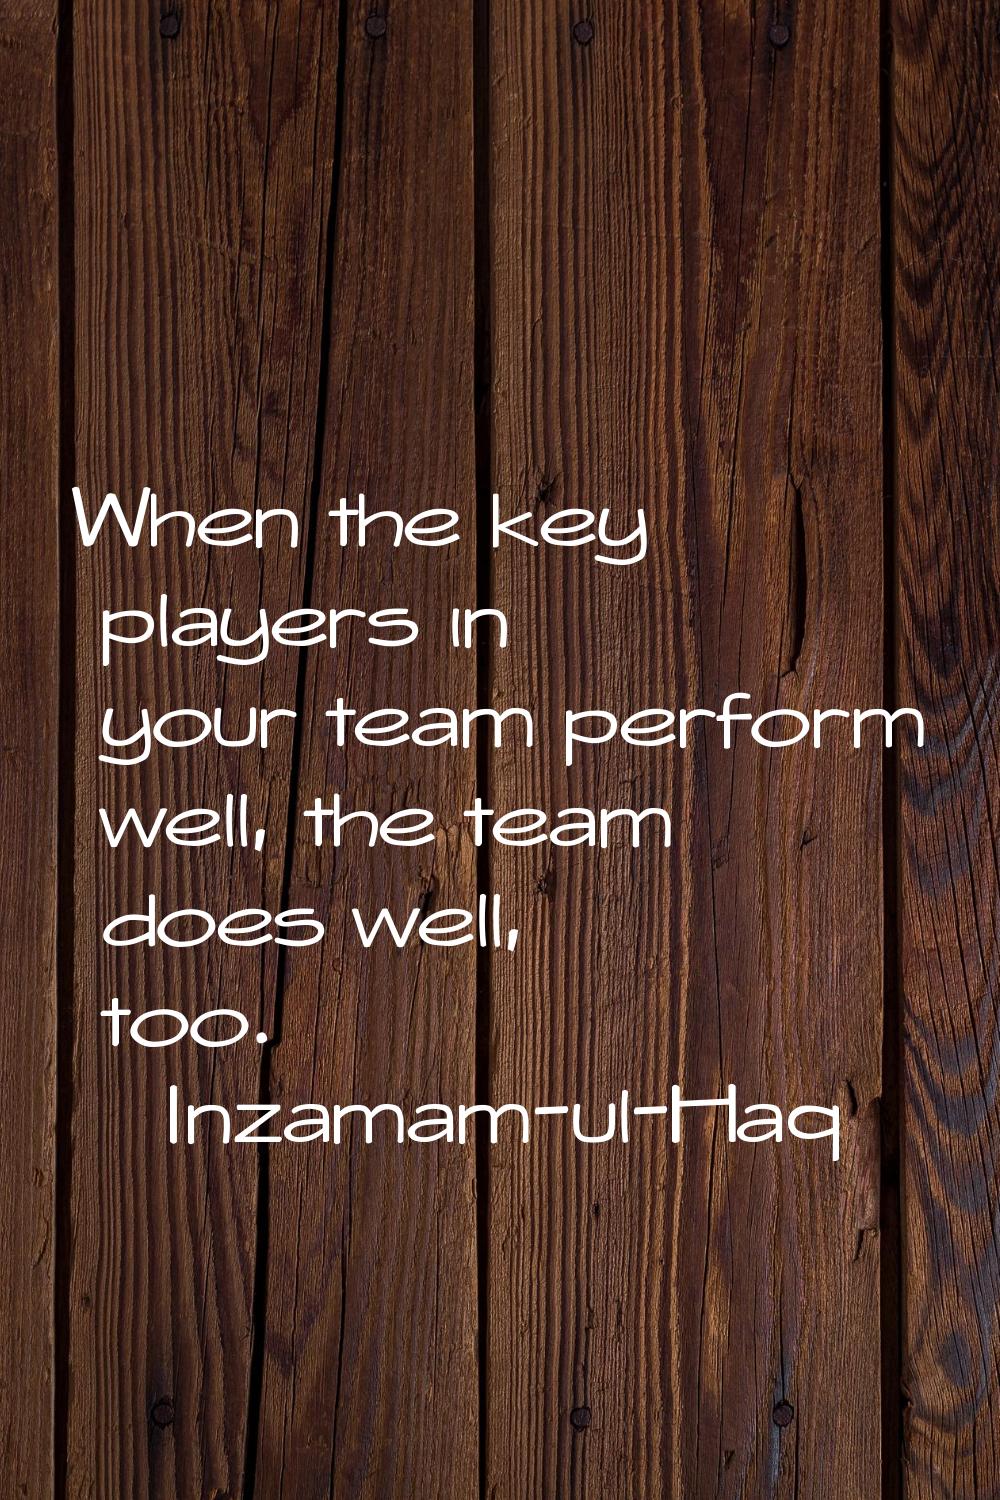 When the key players in your team perform well, the team does well, too.